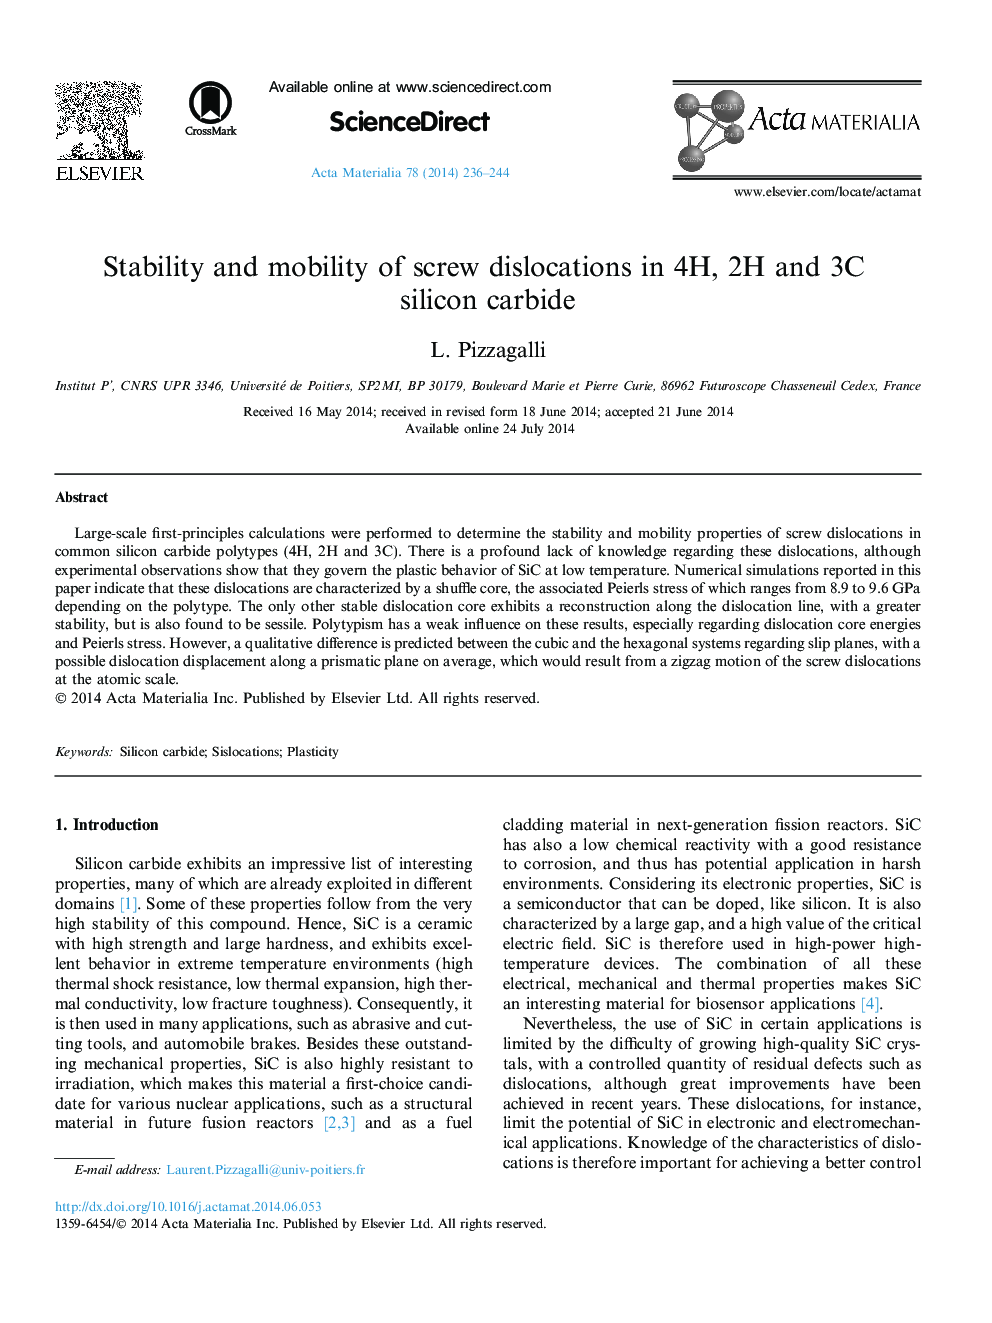 Stability and mobility of screw dislocations in 4H, 2H and 3C silicon carbide